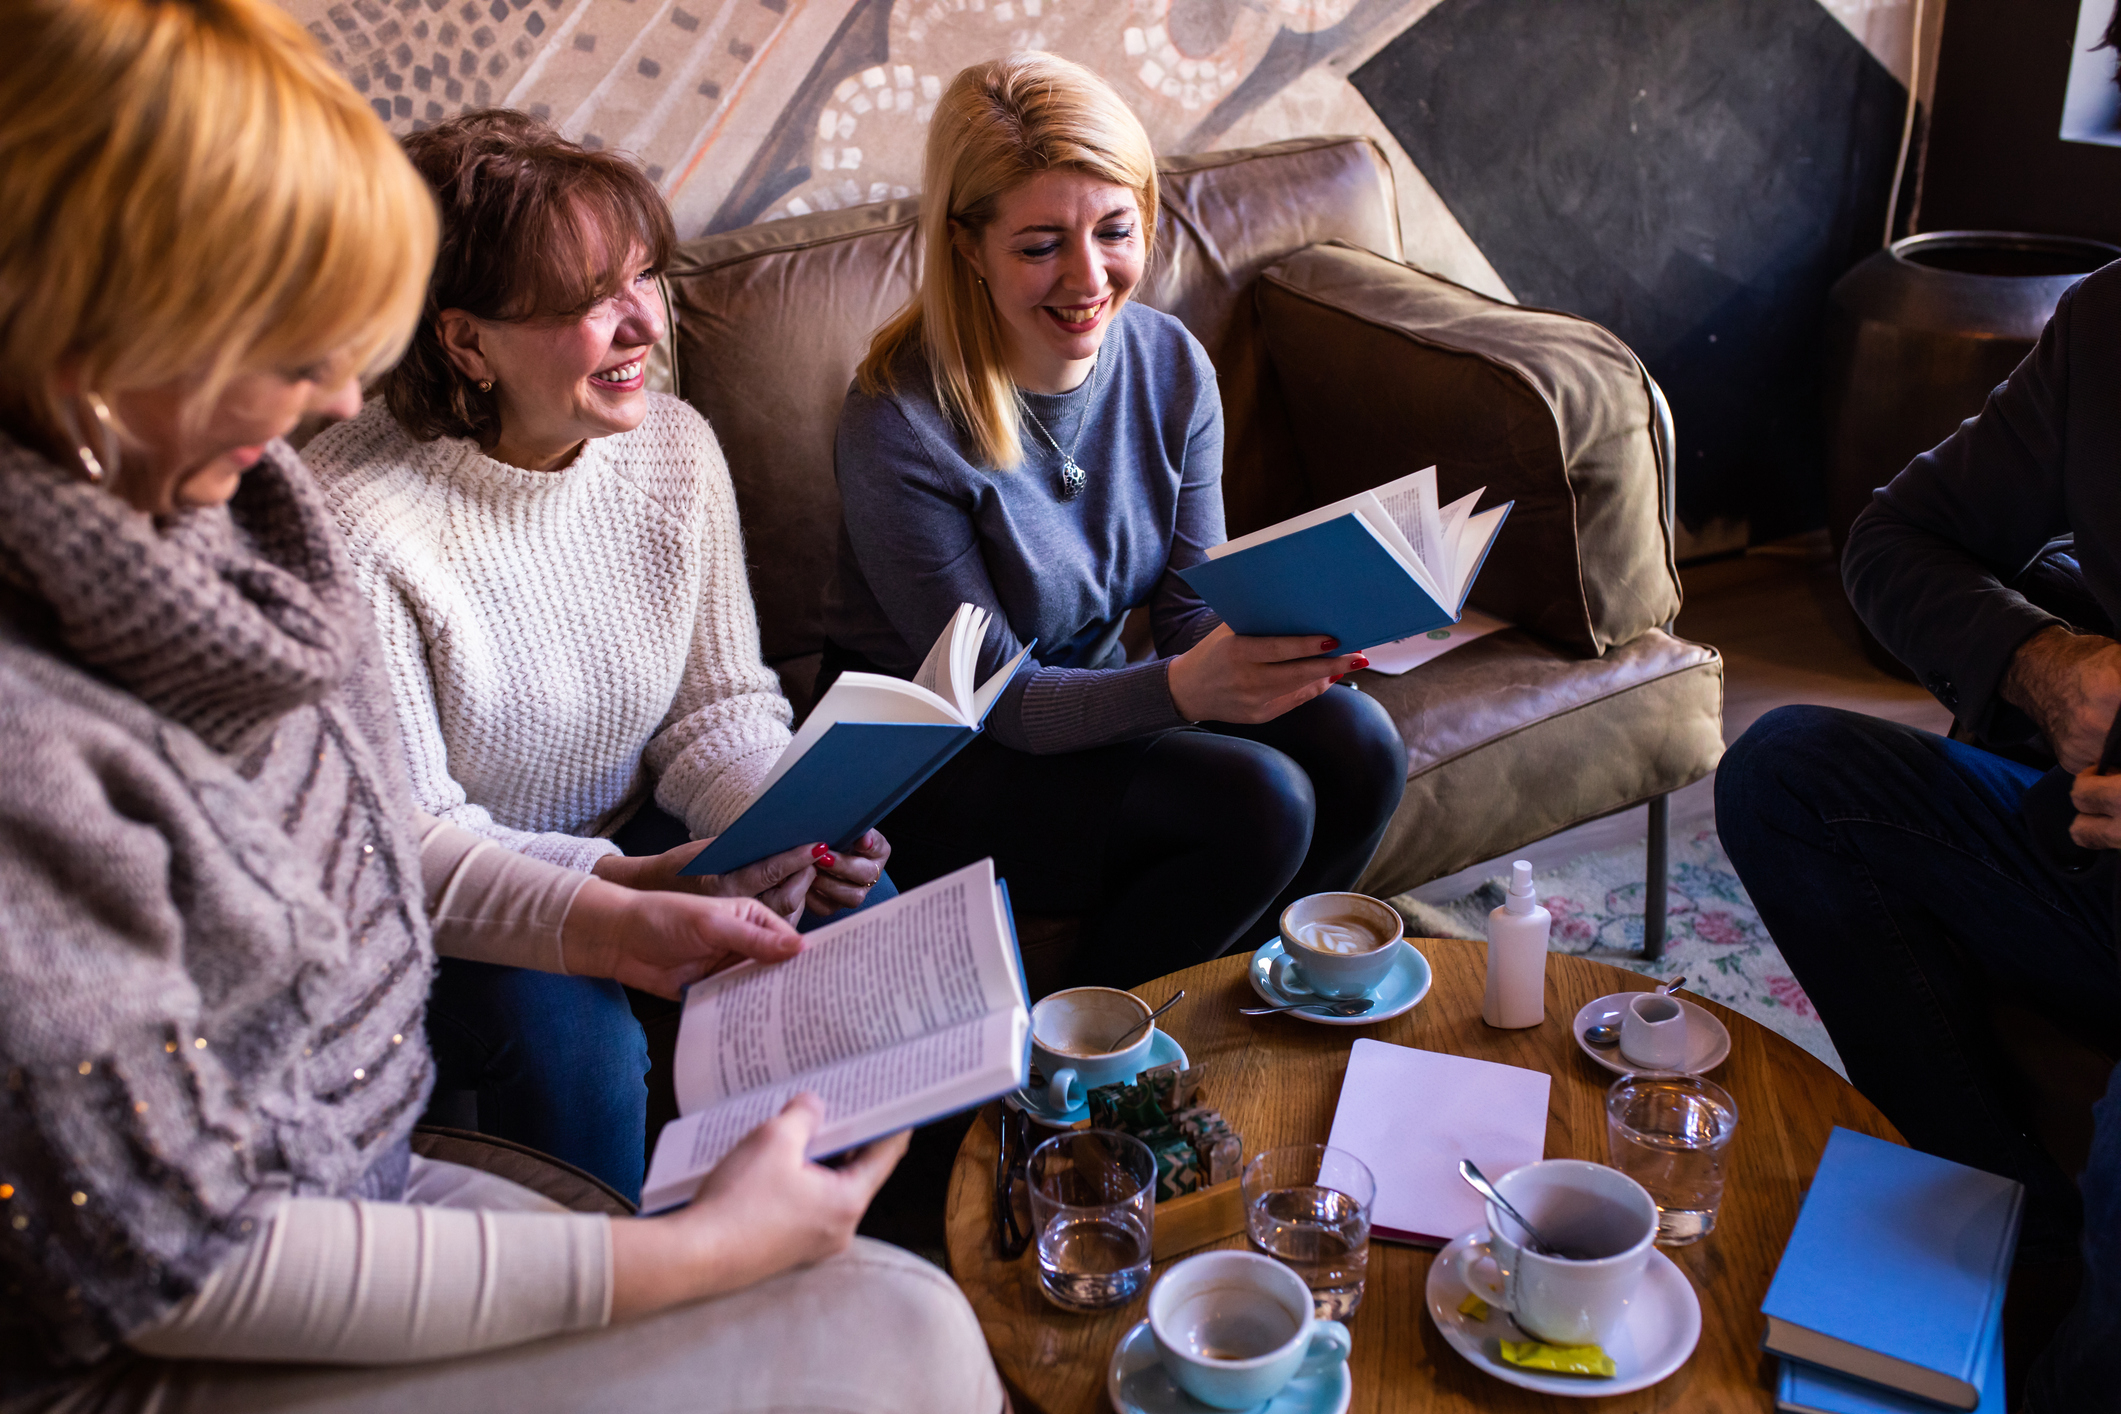 Group of friends enjoying a book club discussion in a cozy living room setting